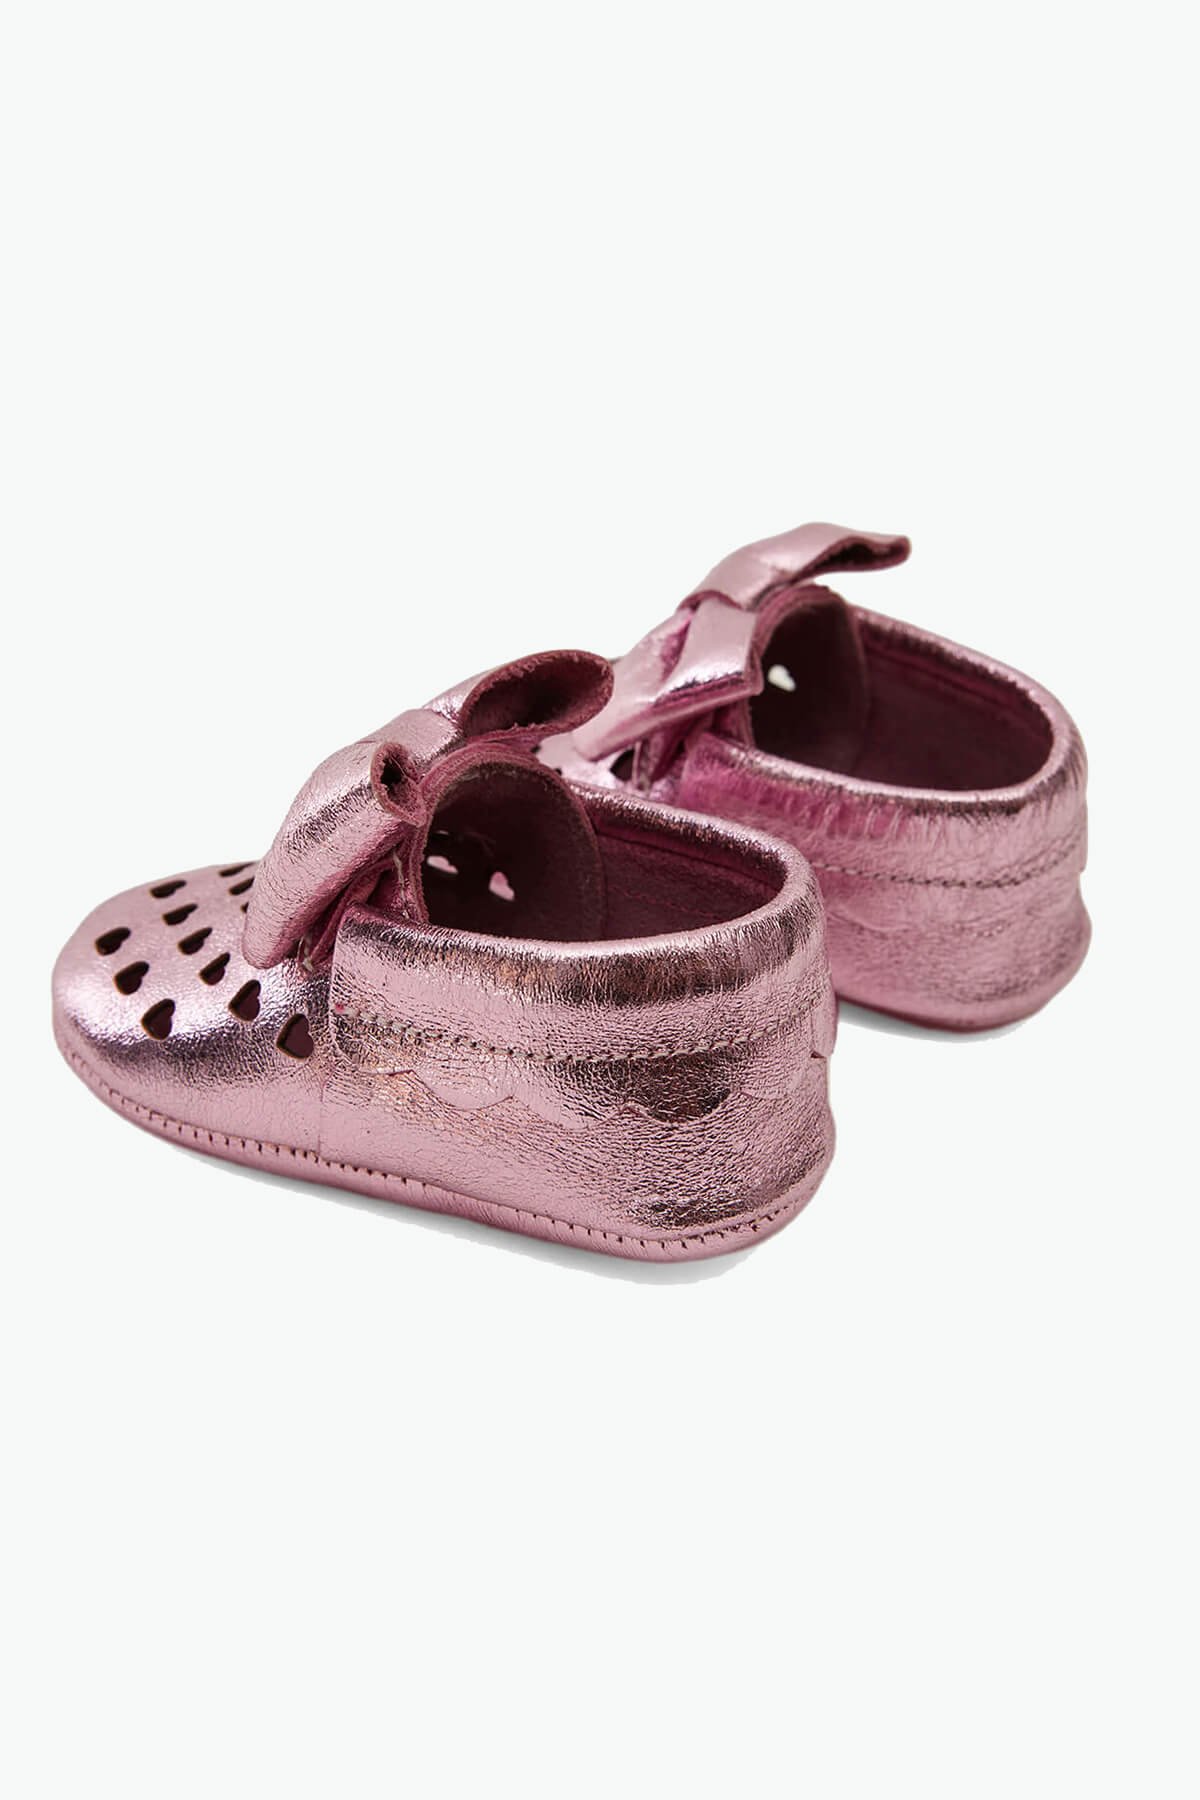 Genuine Leather Elasticated Baby Heart Shoes Pink